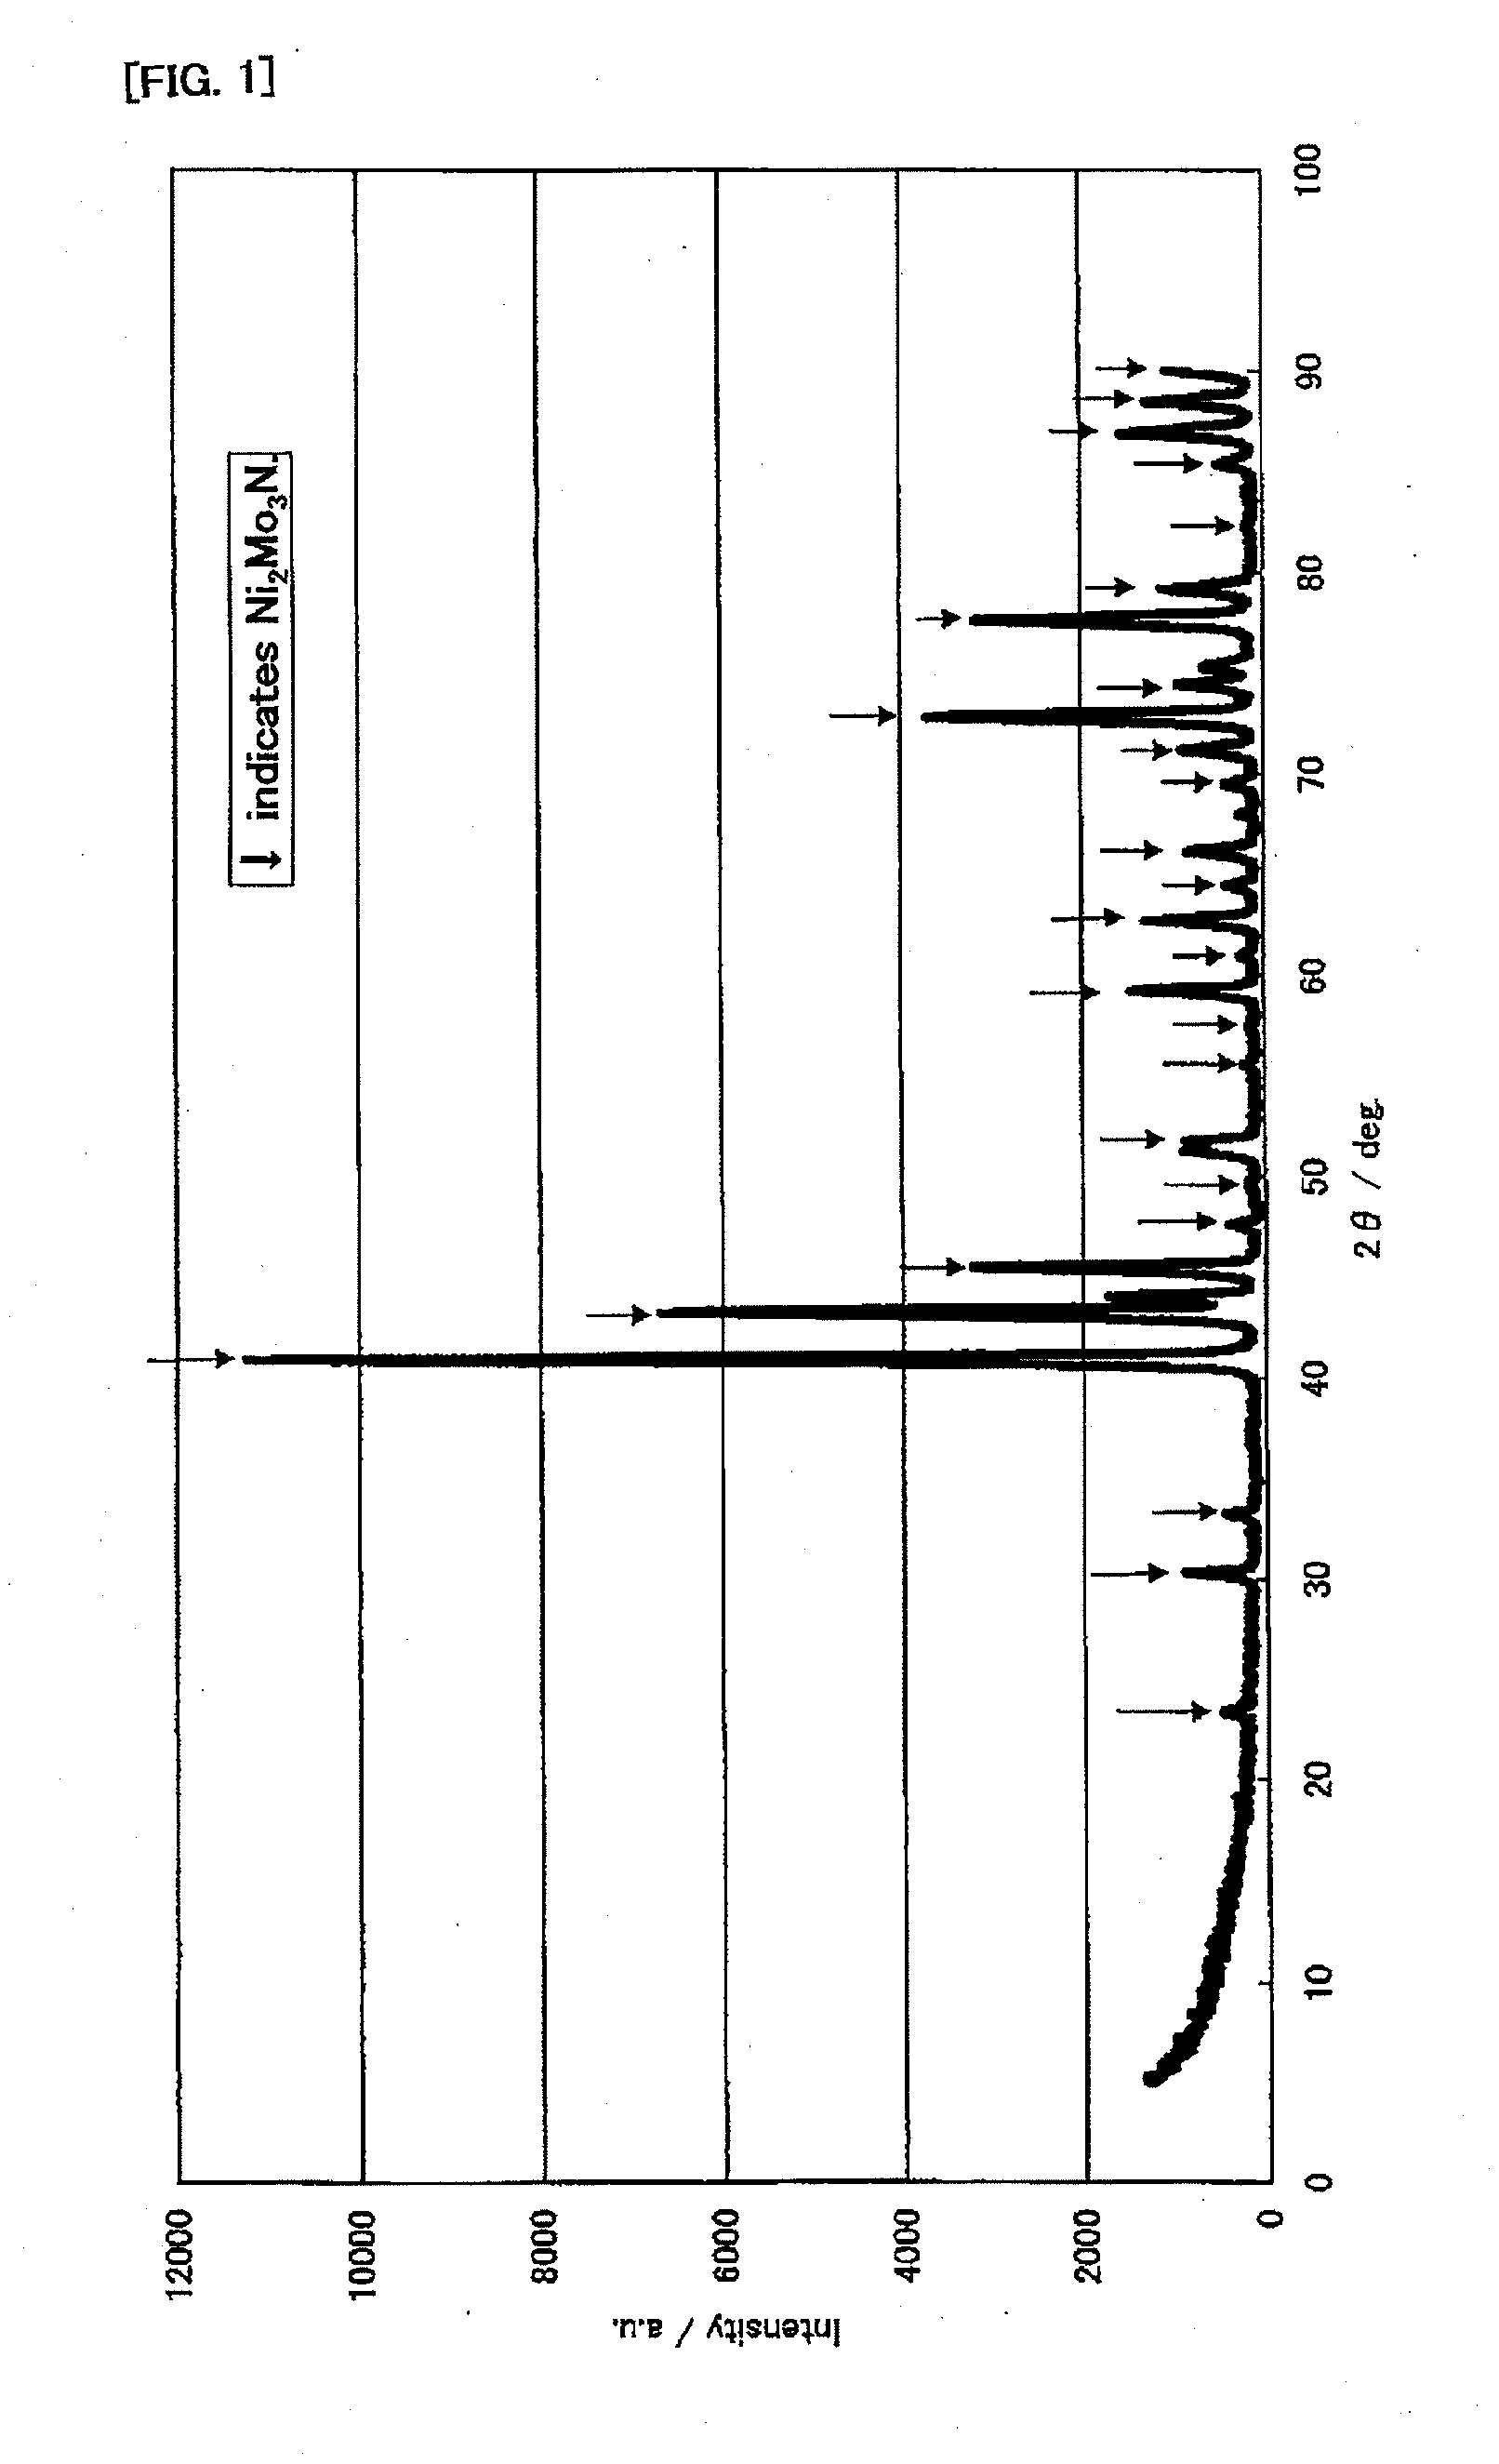 Ammonia decomposition catalysts and their production processes, as well as ammonia treatment method